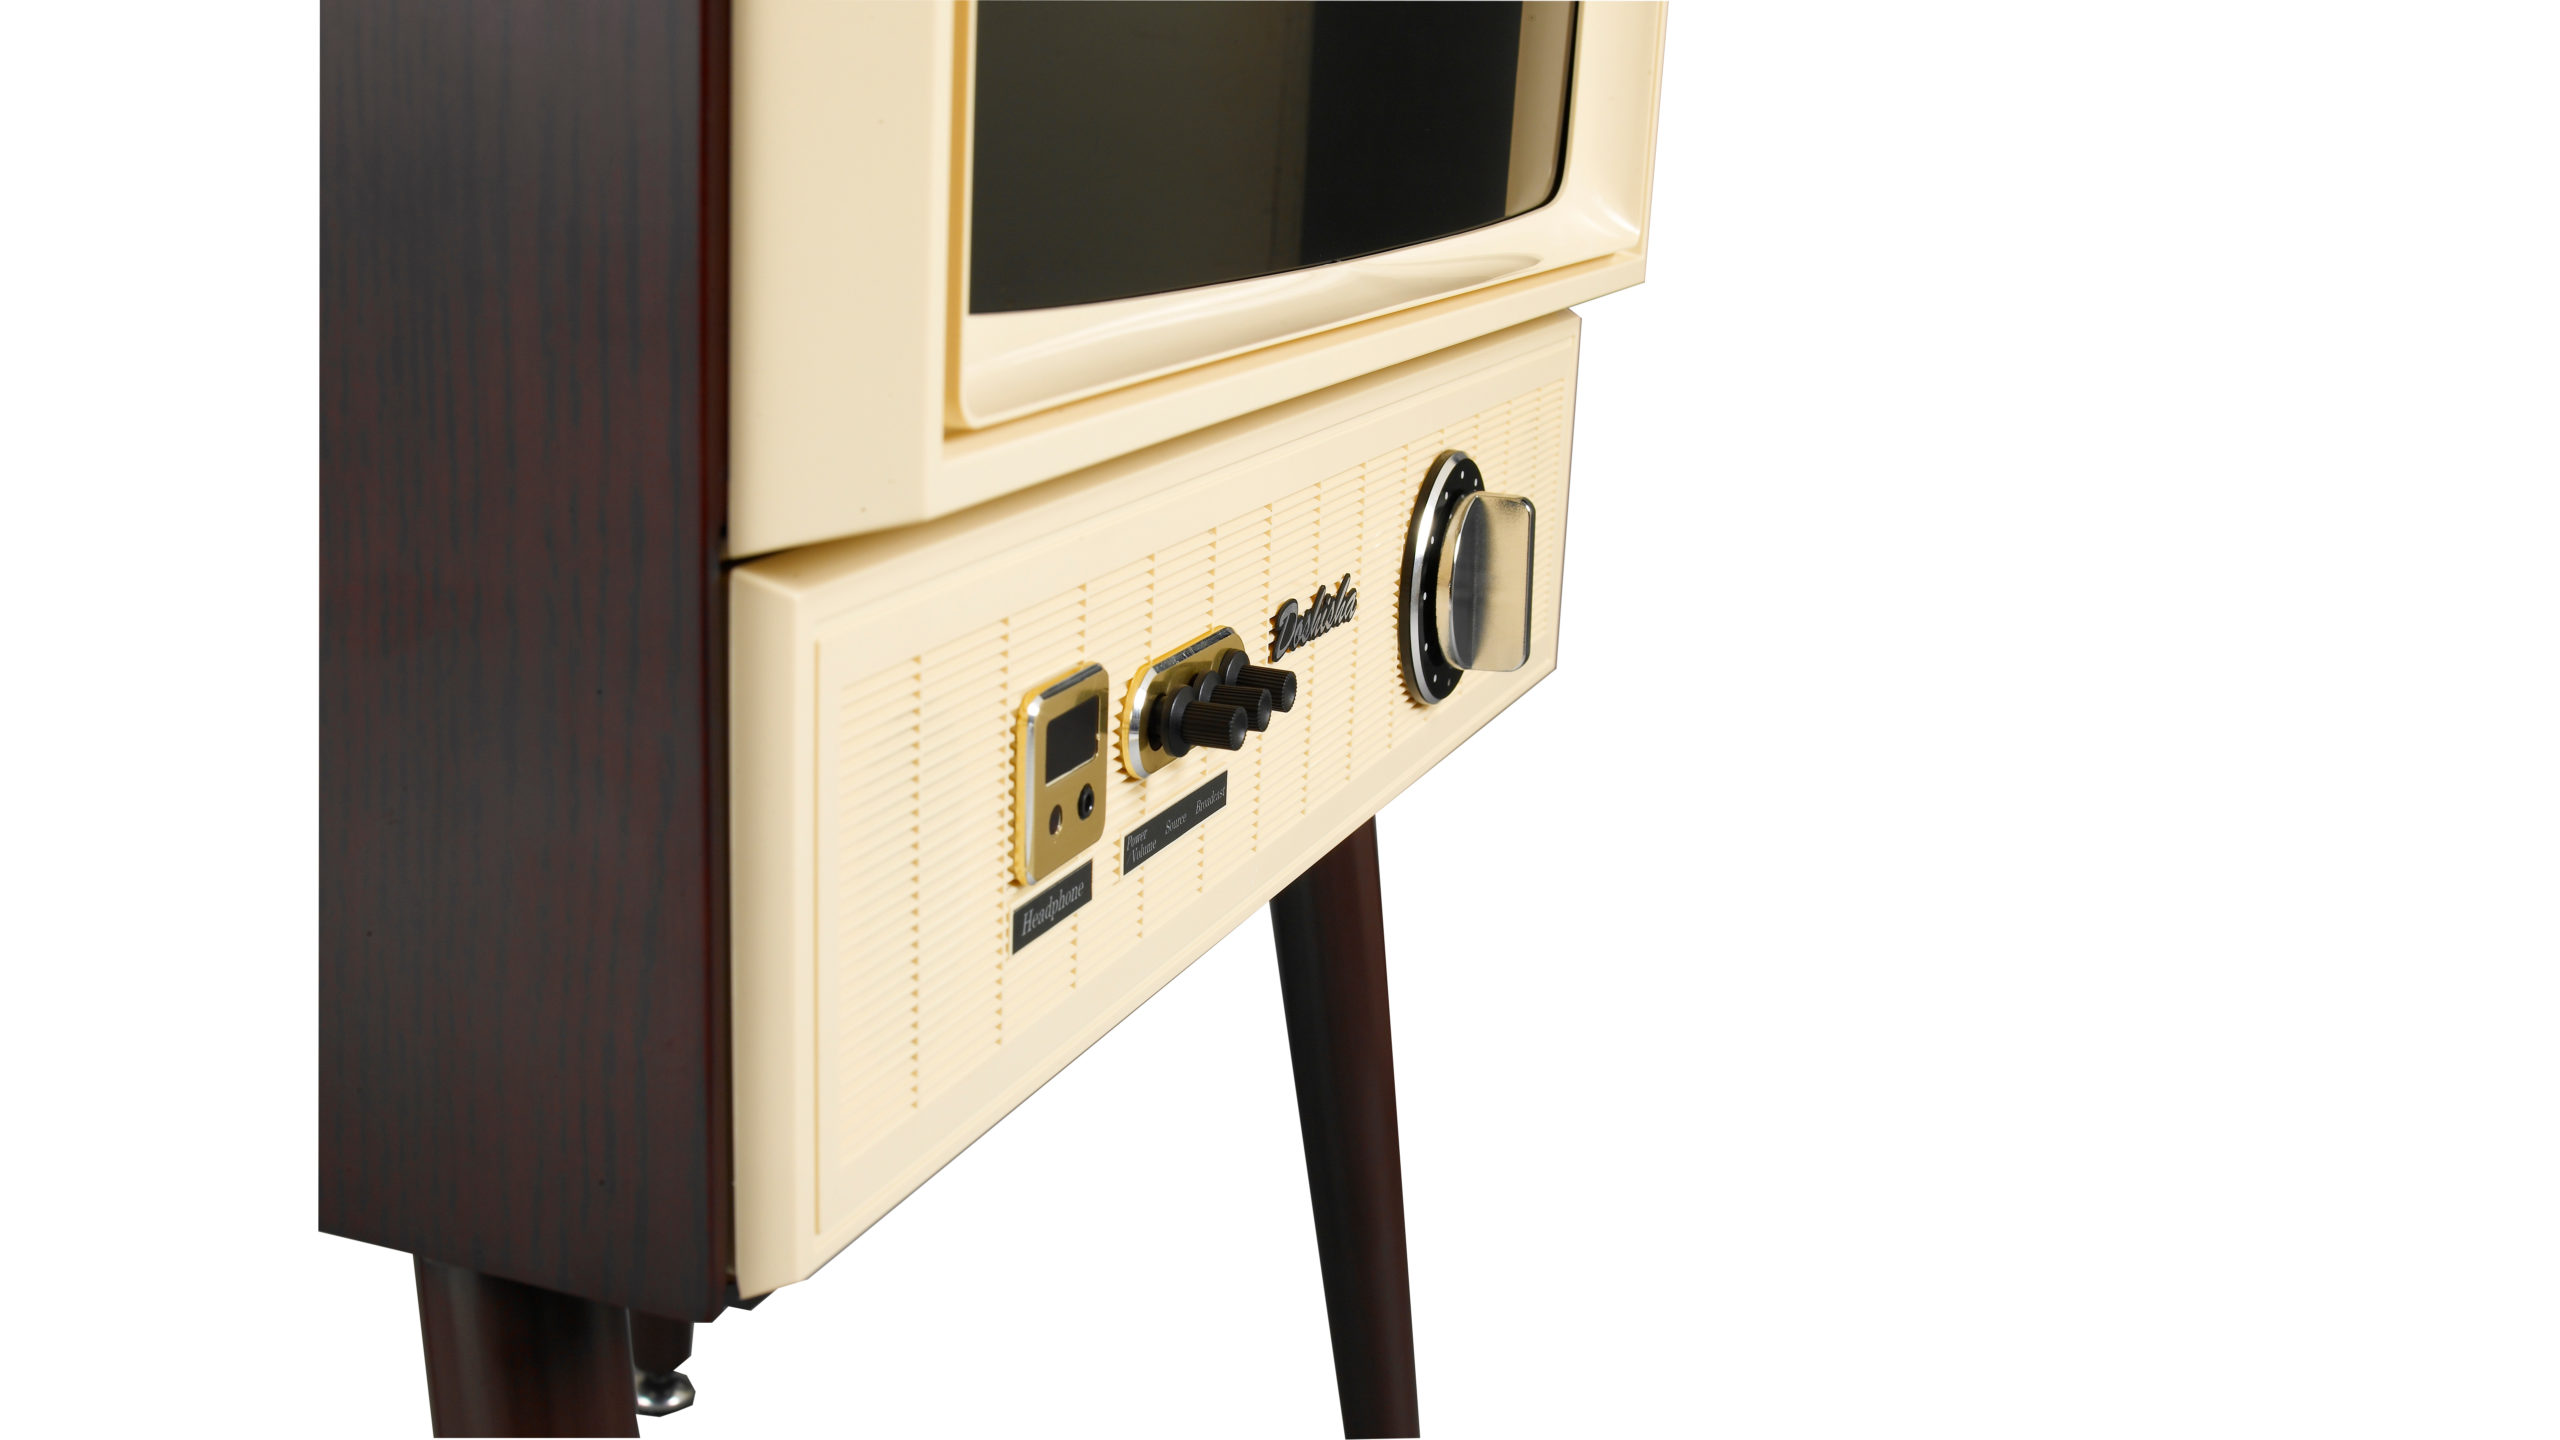 This Retro TV Is Filled With Modern Electronics